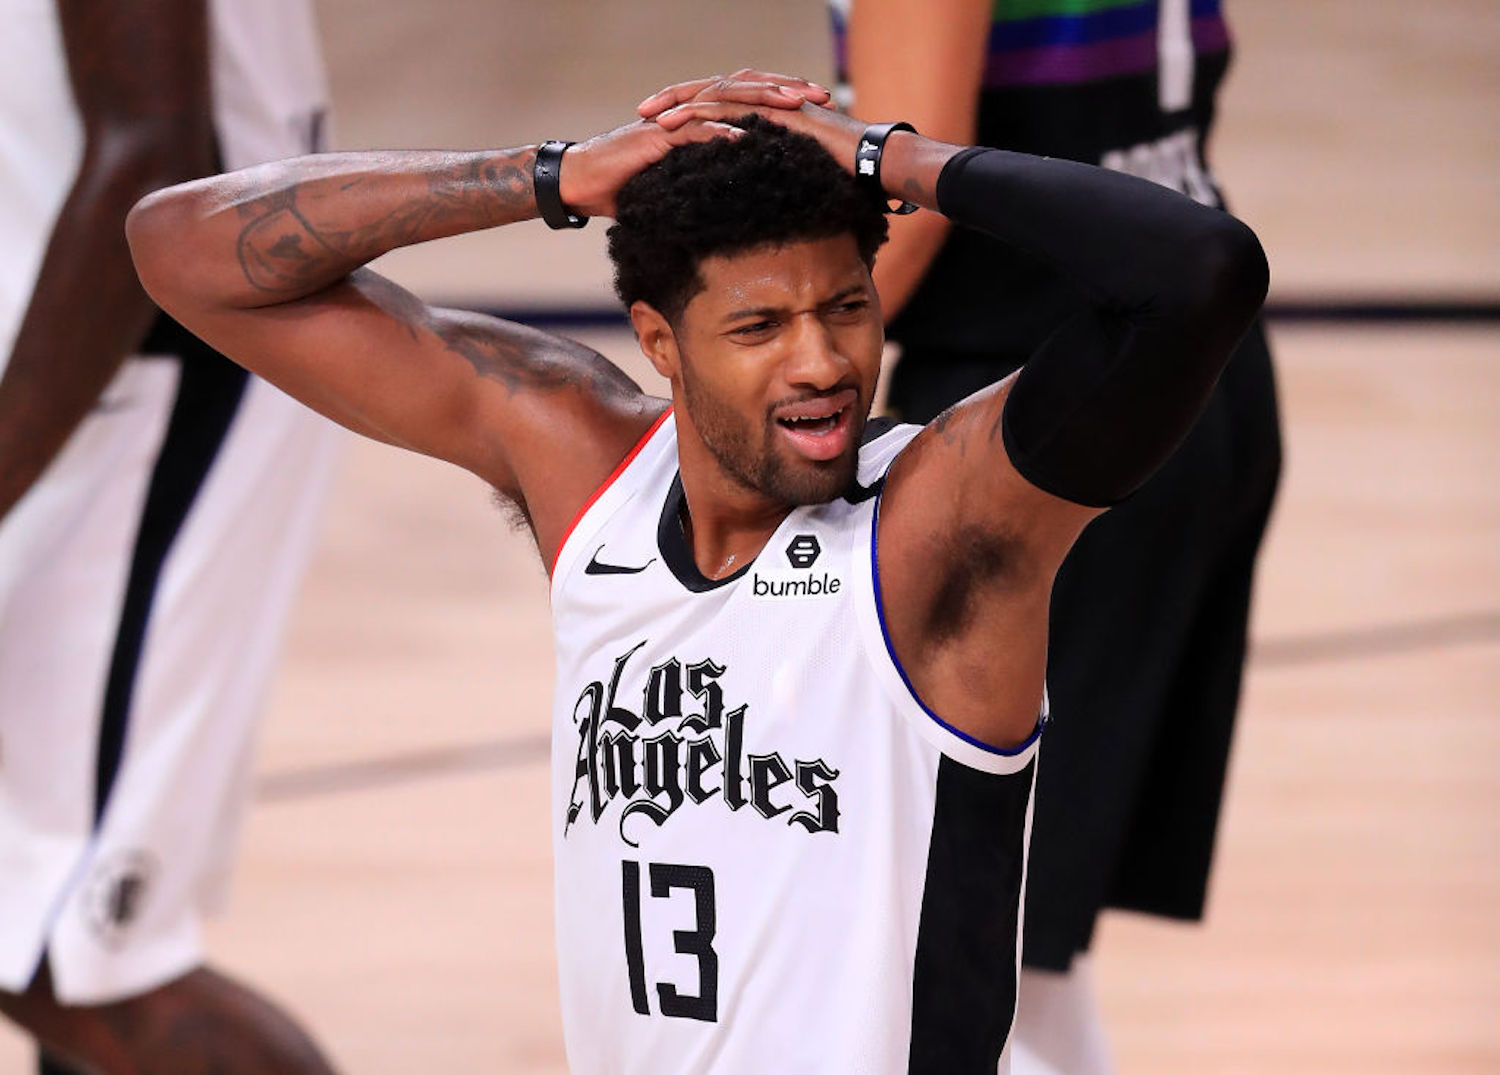 When the Clippers mortgaged their future for four years of Paul George, the team didn't expect the season so end the way it did.